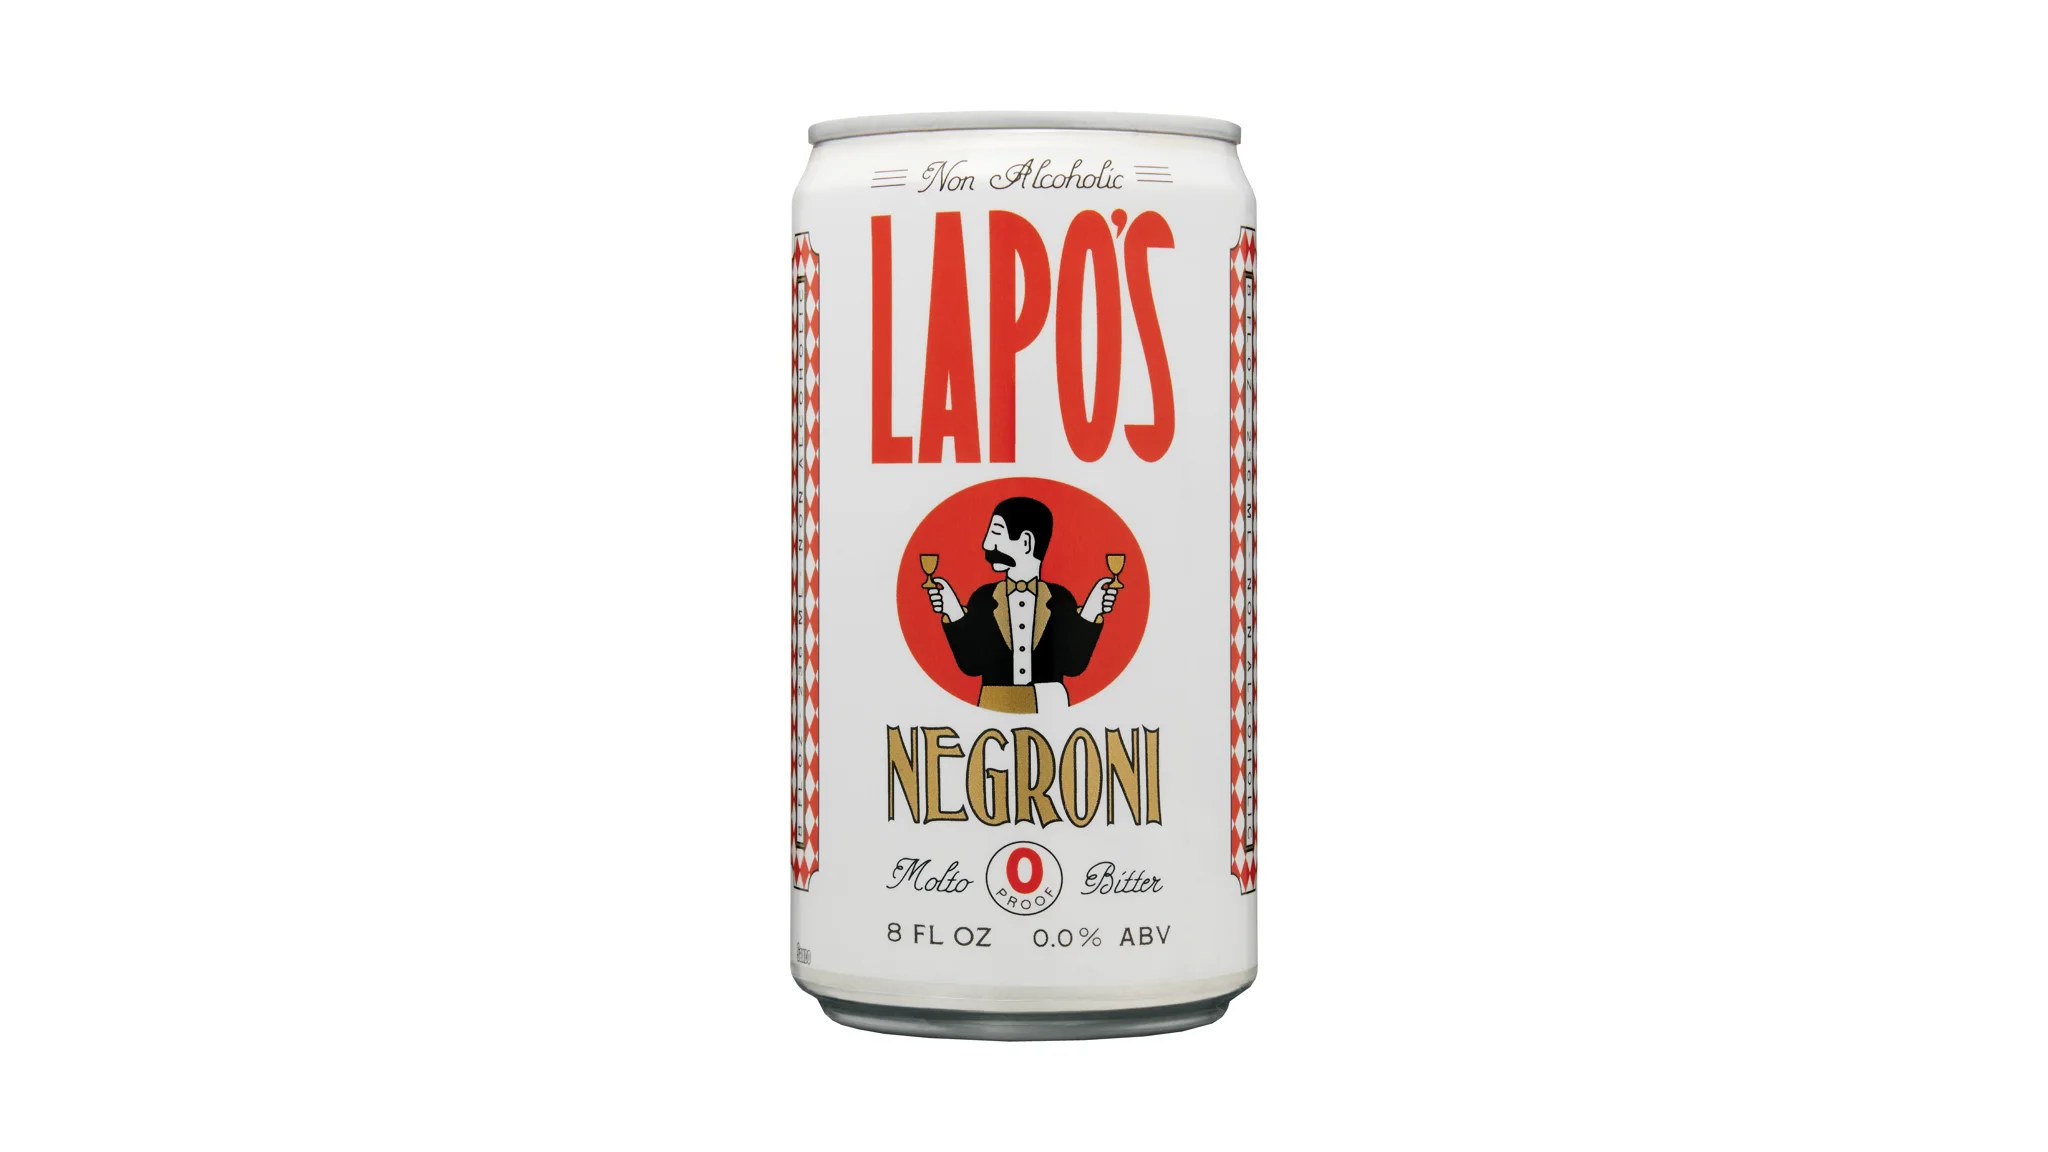 Lapo’s Nonalcoholic Negroni Packaging Opts For Elegance